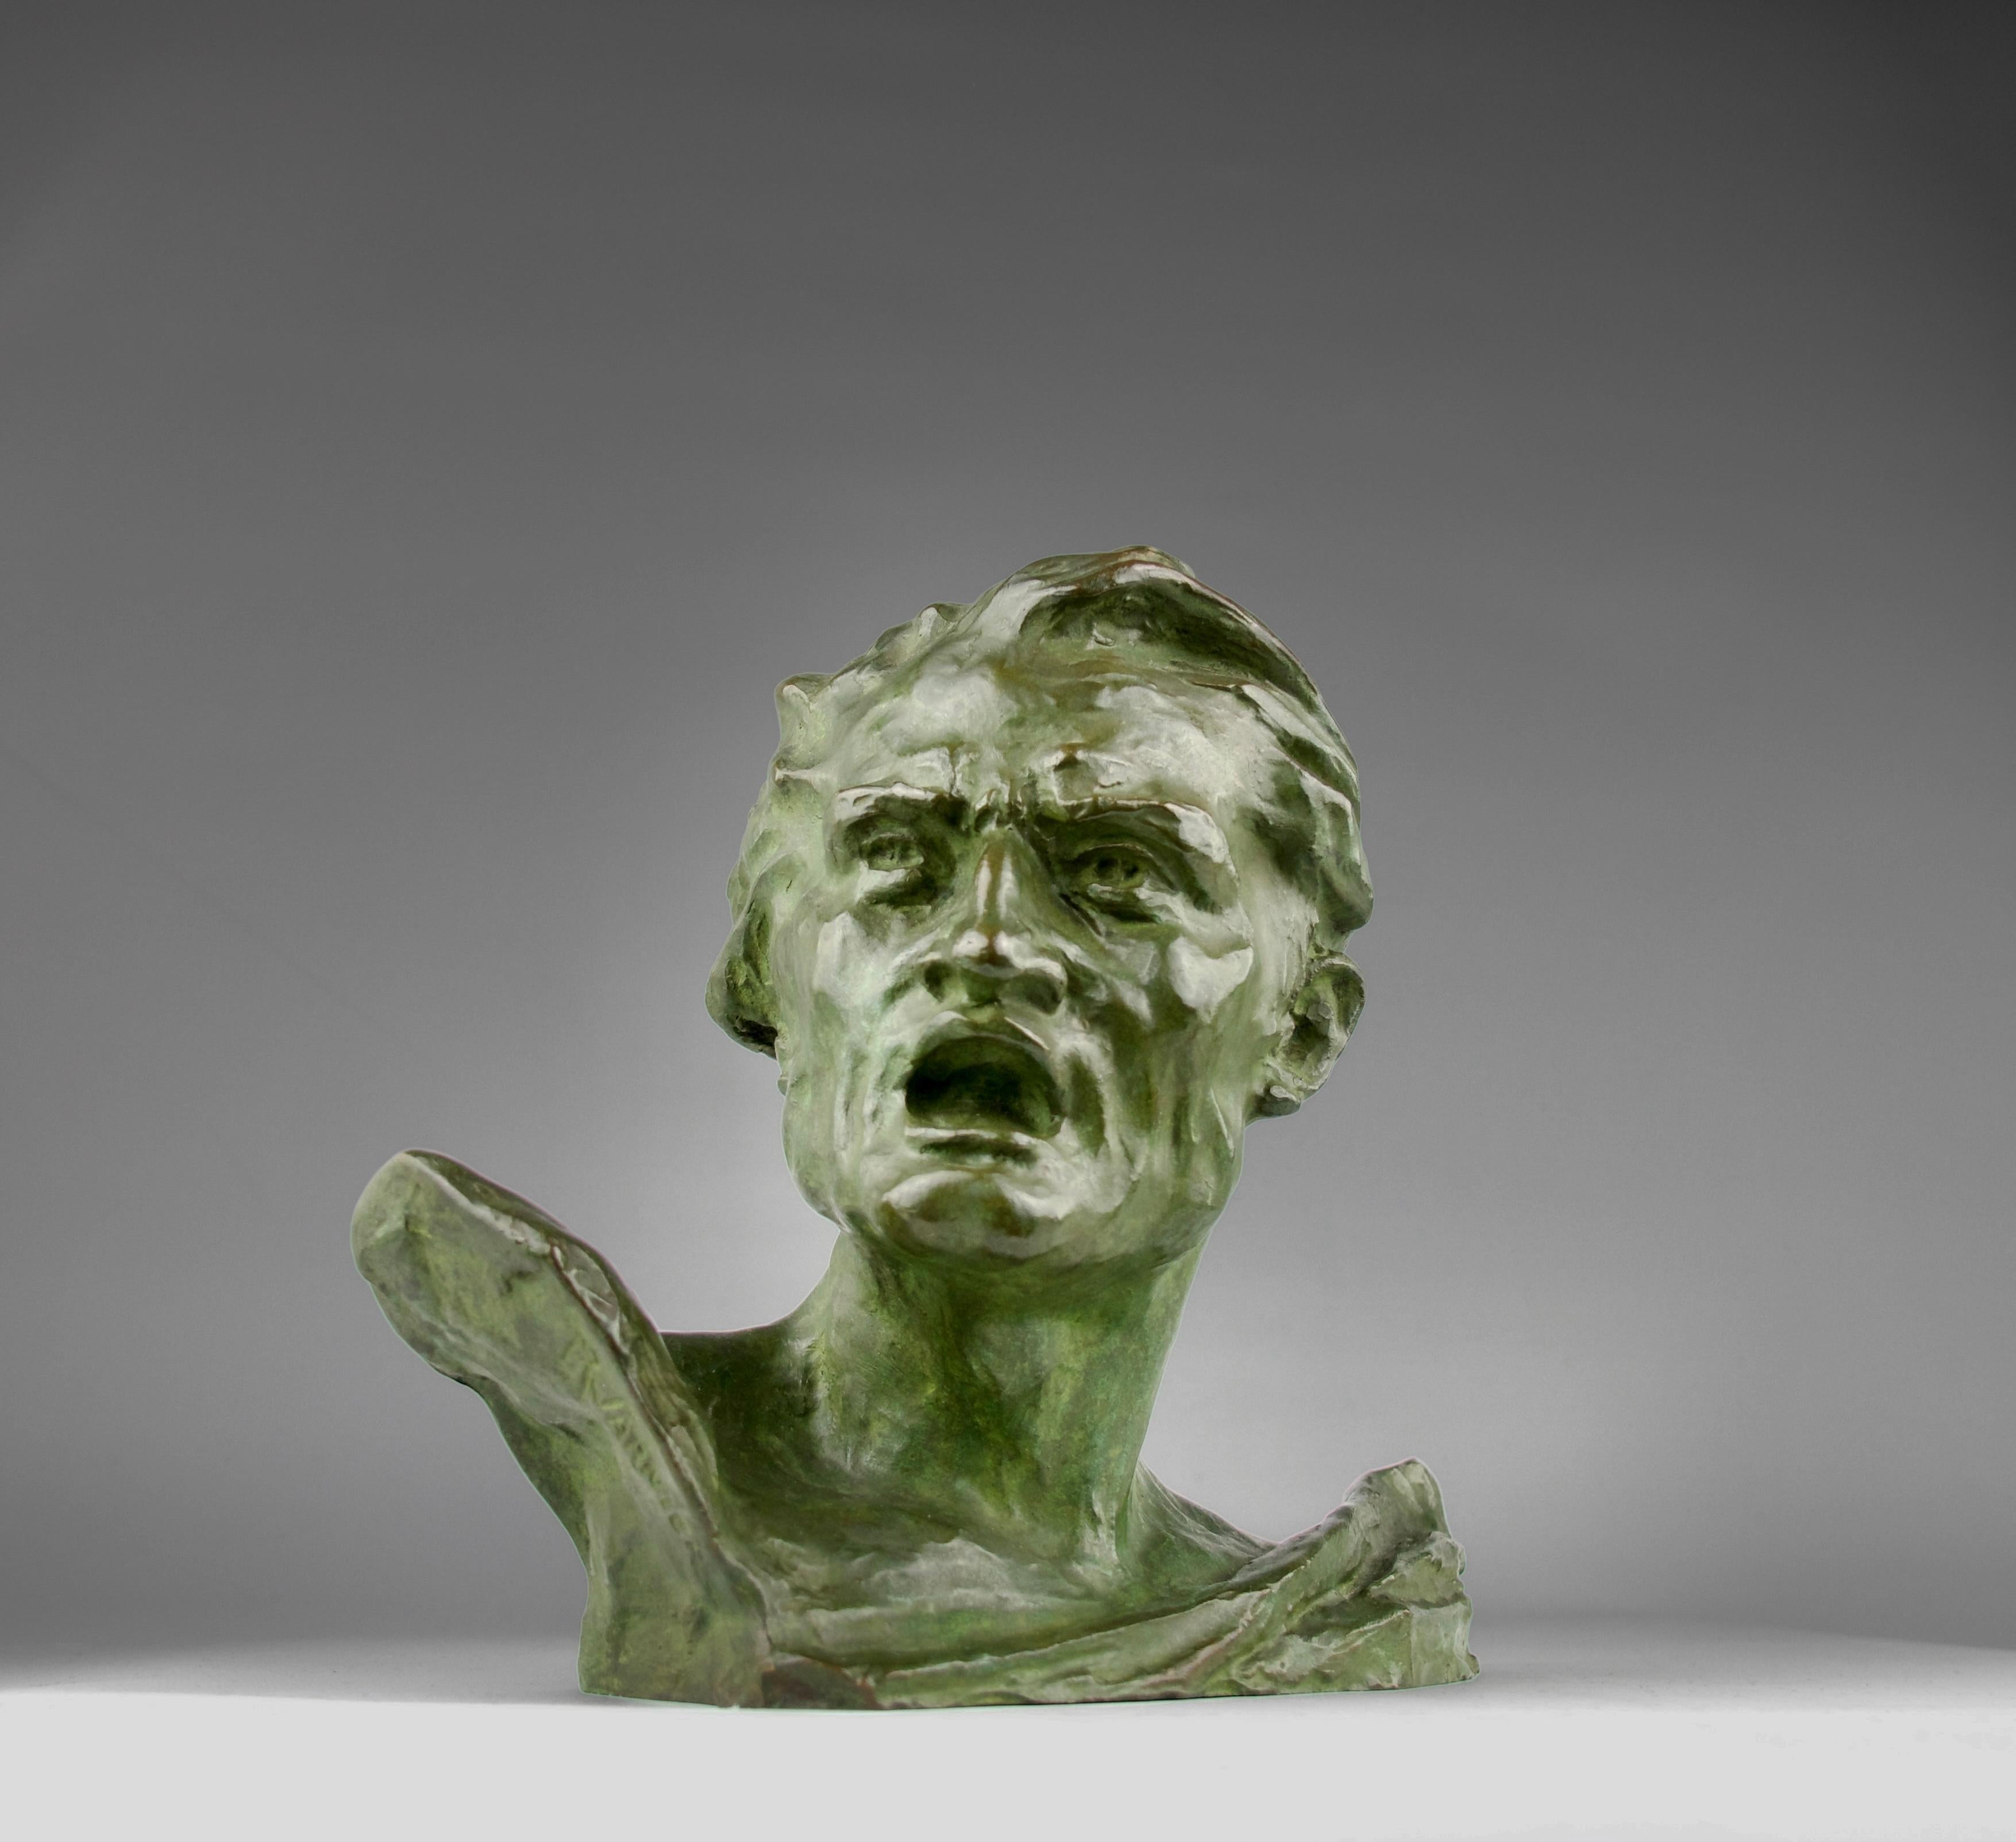 Superb Demosthenes bust in green hued patinated bronze by the artist René André Varnier. Excellent capture of the oratory prowess of Demosthenes considered one of the greatest of his time. France, 1930s.

Signed R. Varnier. 

Very good